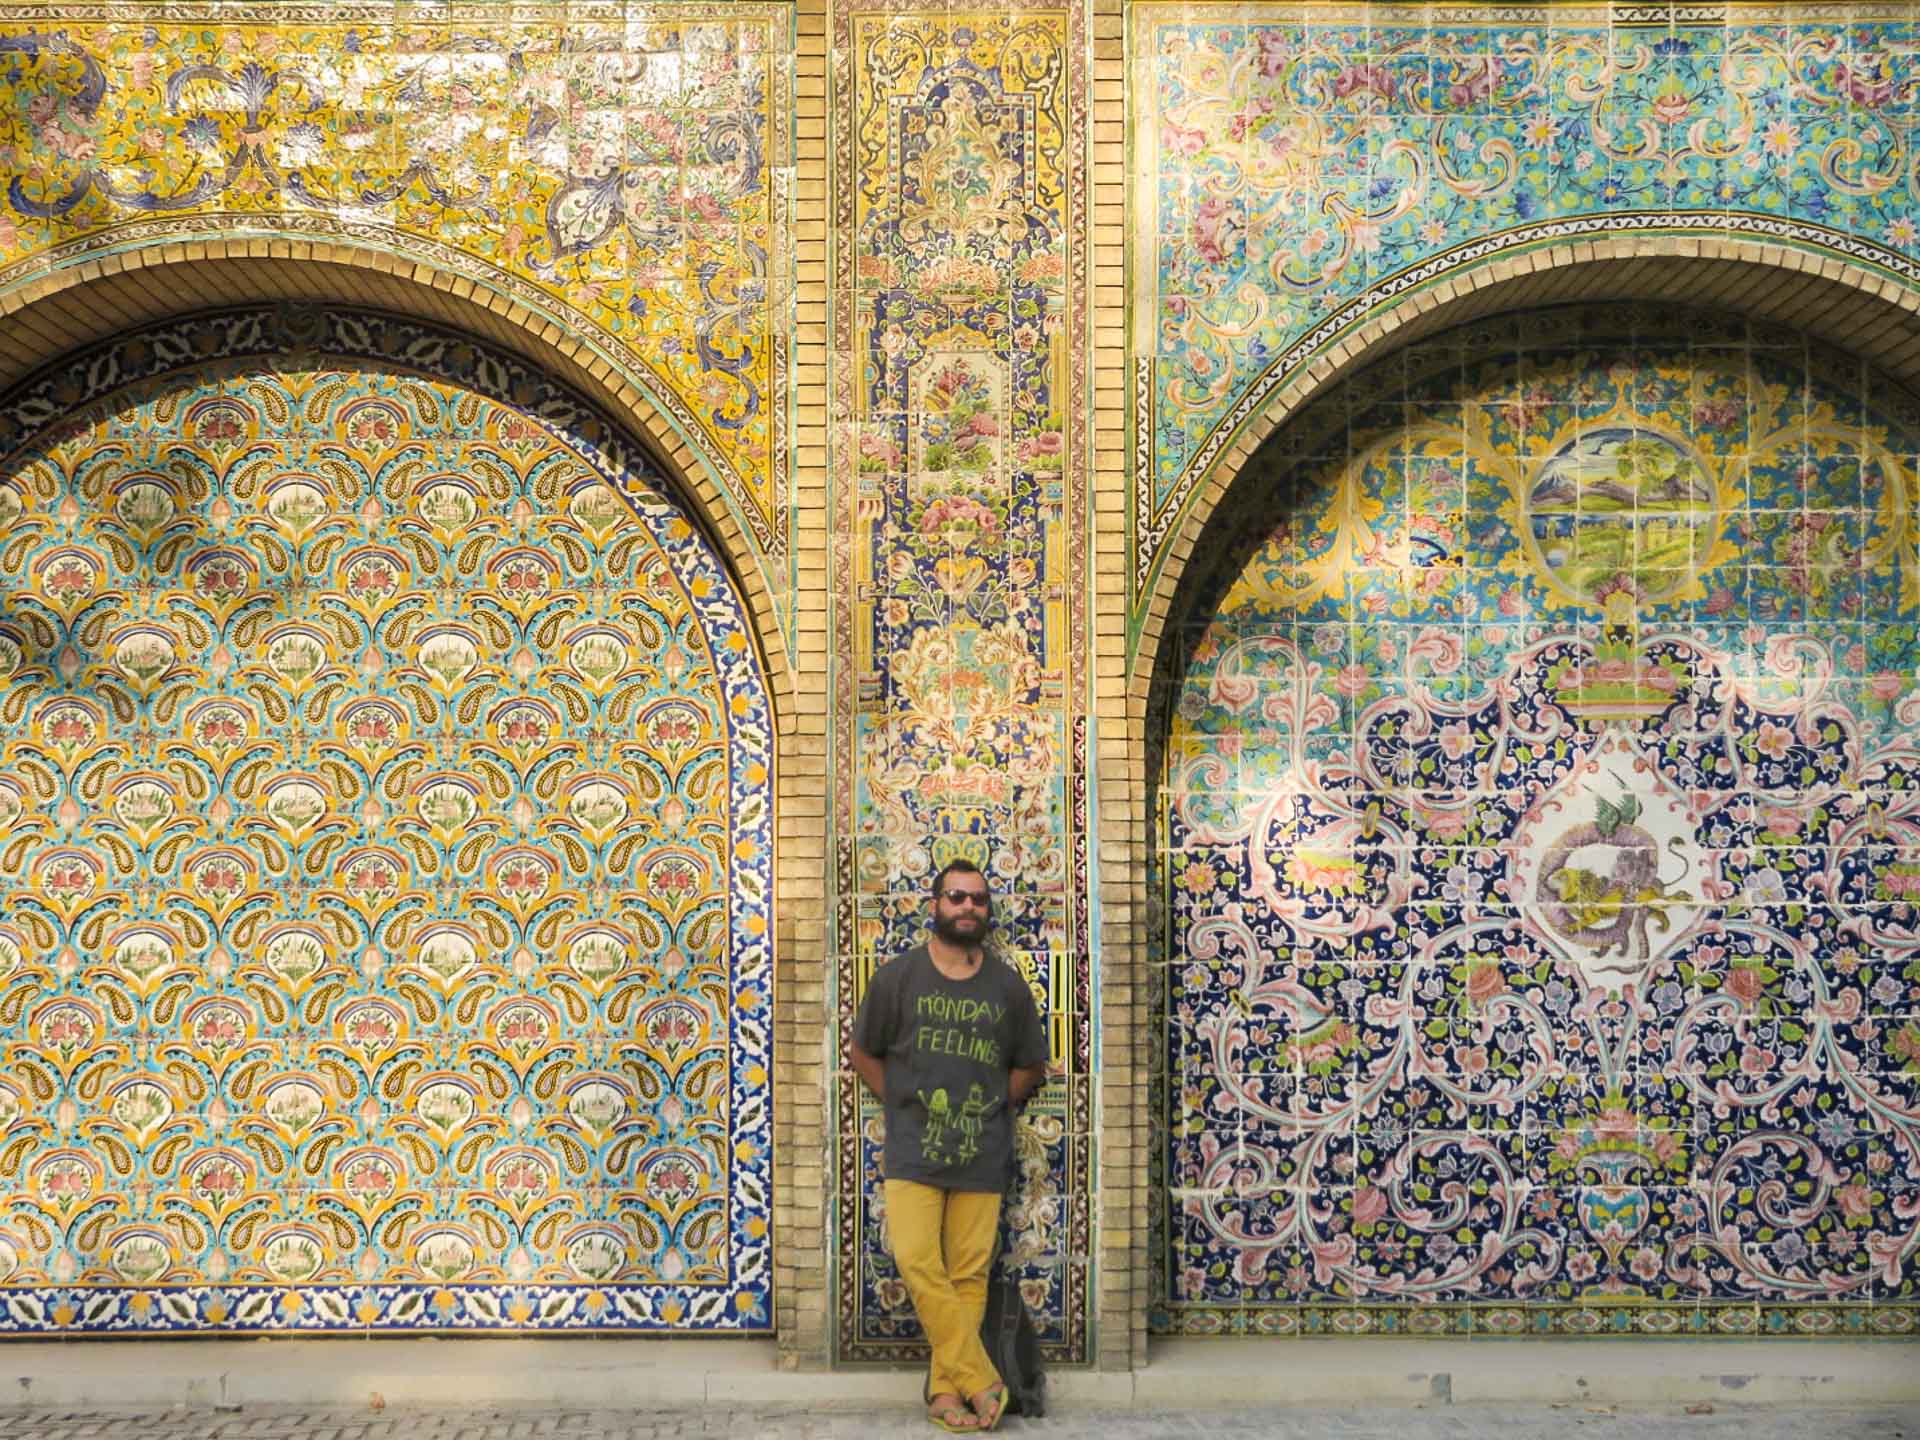 Tiago posing in front of the tiled wall in Golestan Palace, Tehran